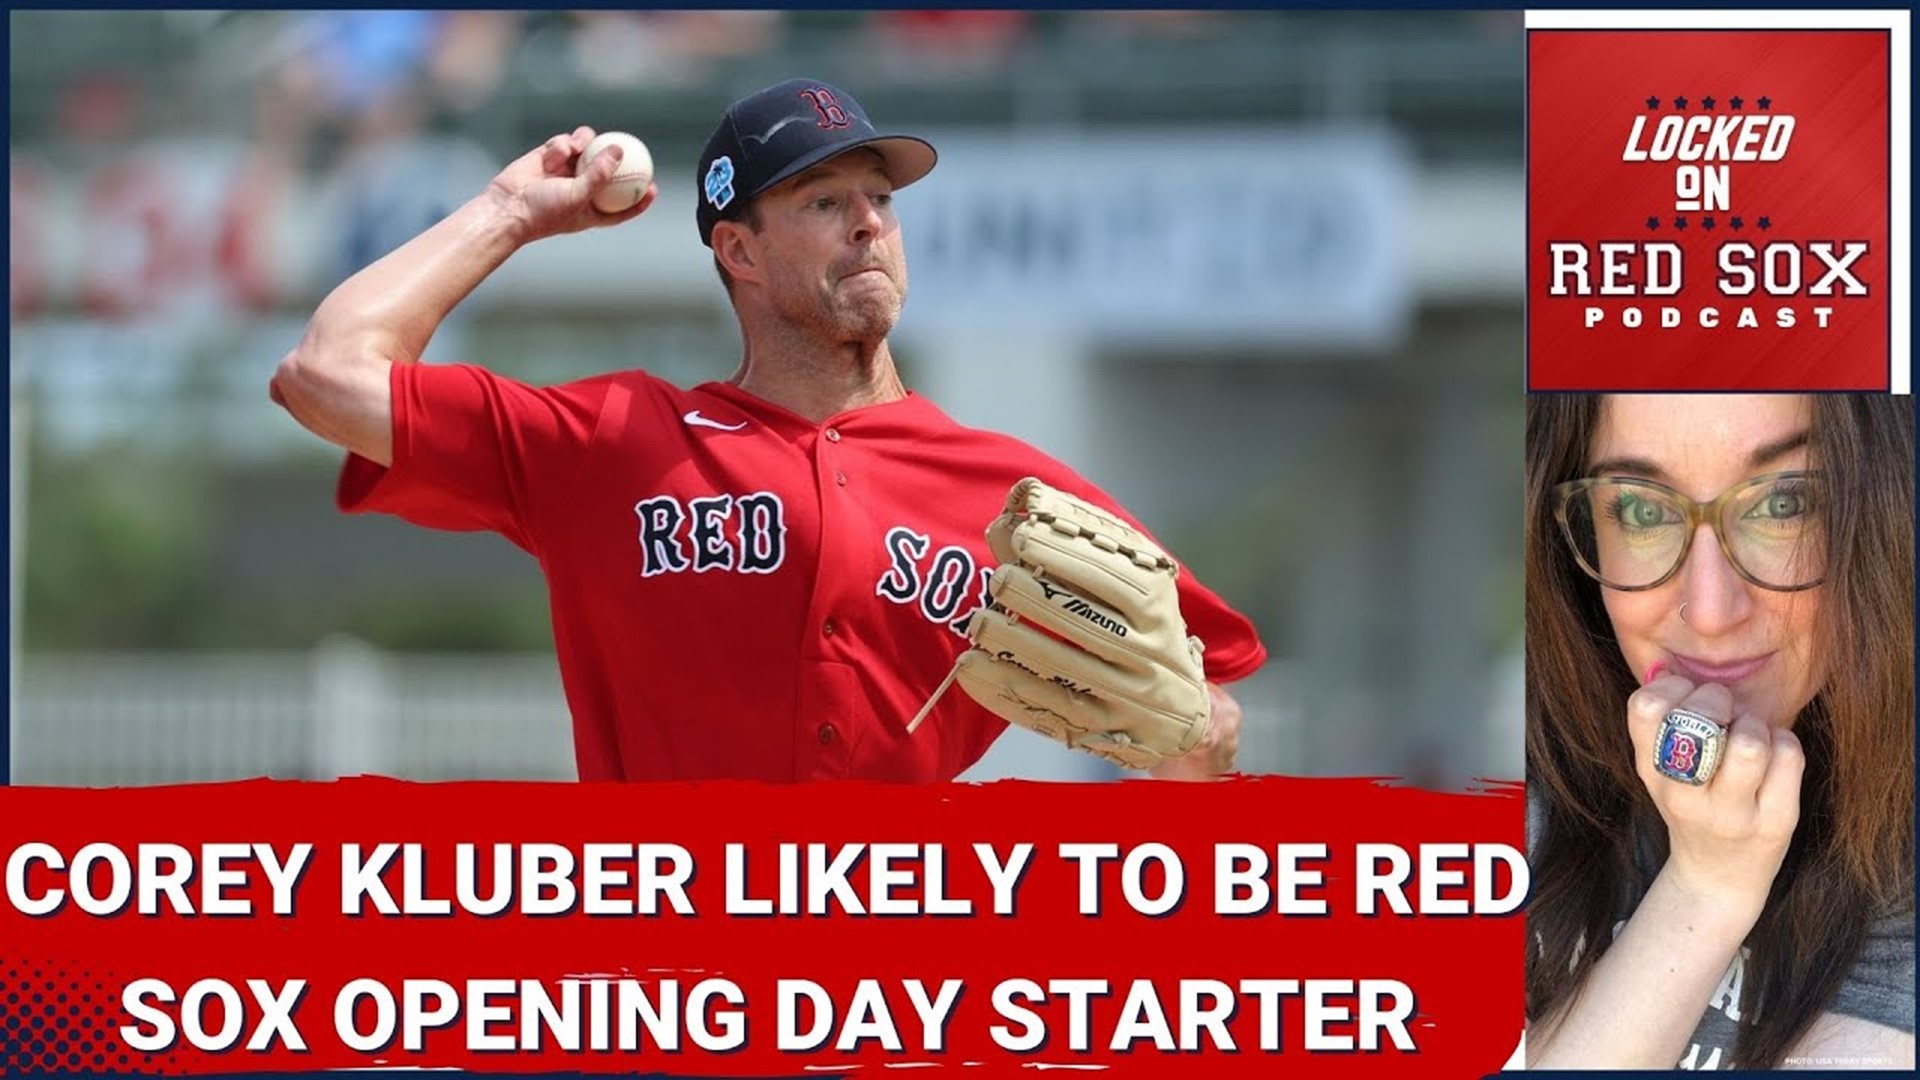 Opening Day is approaching and we now have an idea of who the Boston Red Sox starter will become in their game against the Baltimore Orioles at Fenway Park.